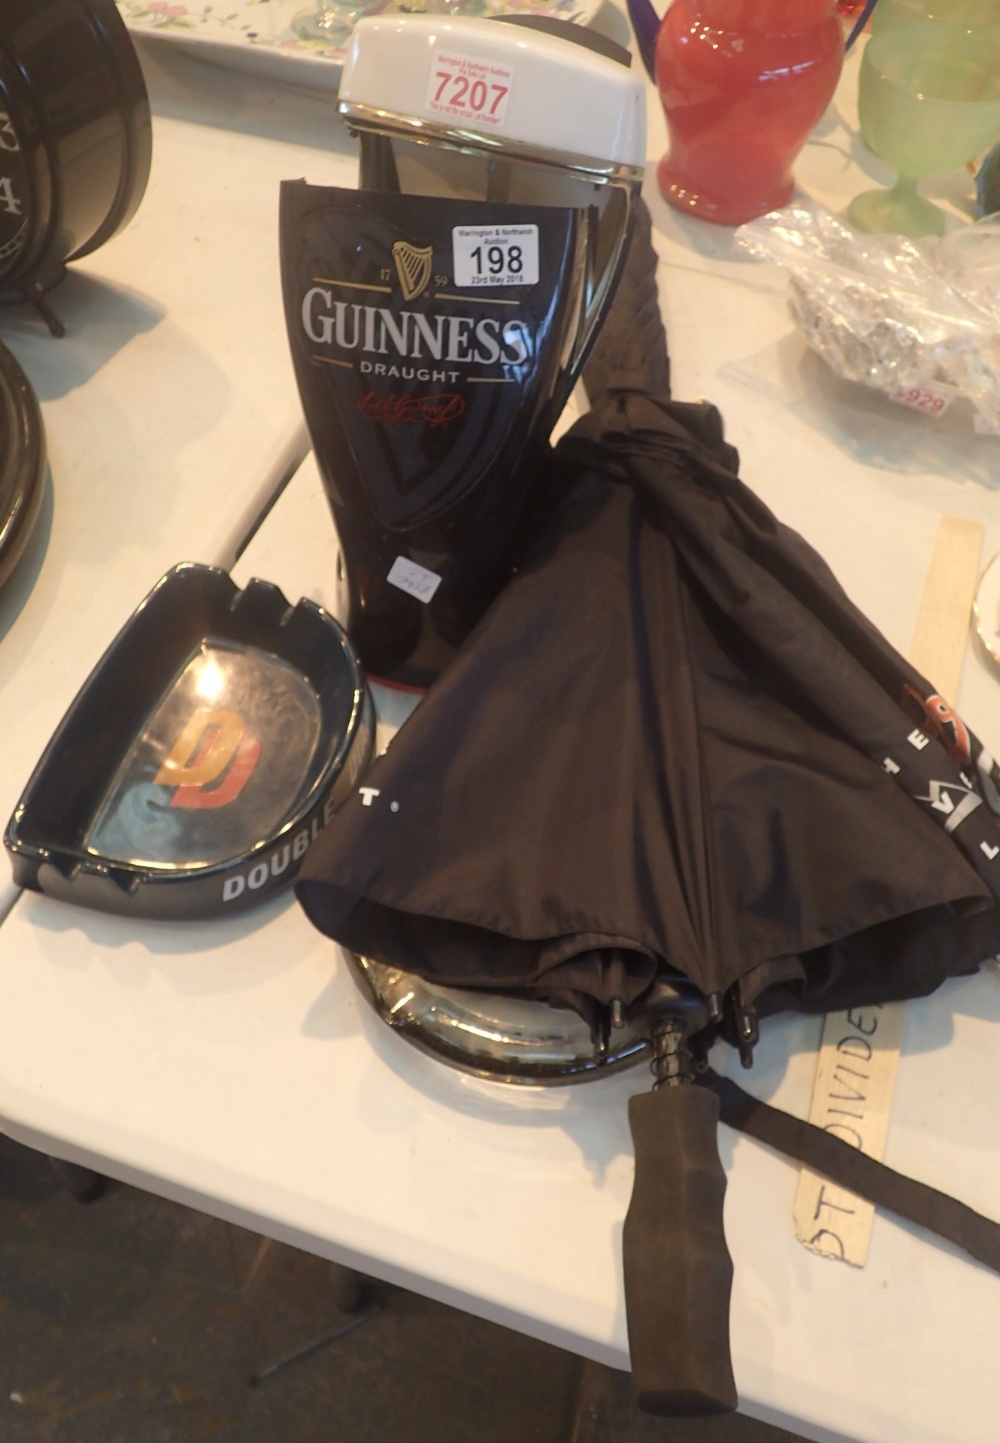 Guinness pub counter with light up mount Double Diamond ashtray and another ashtray marked ER